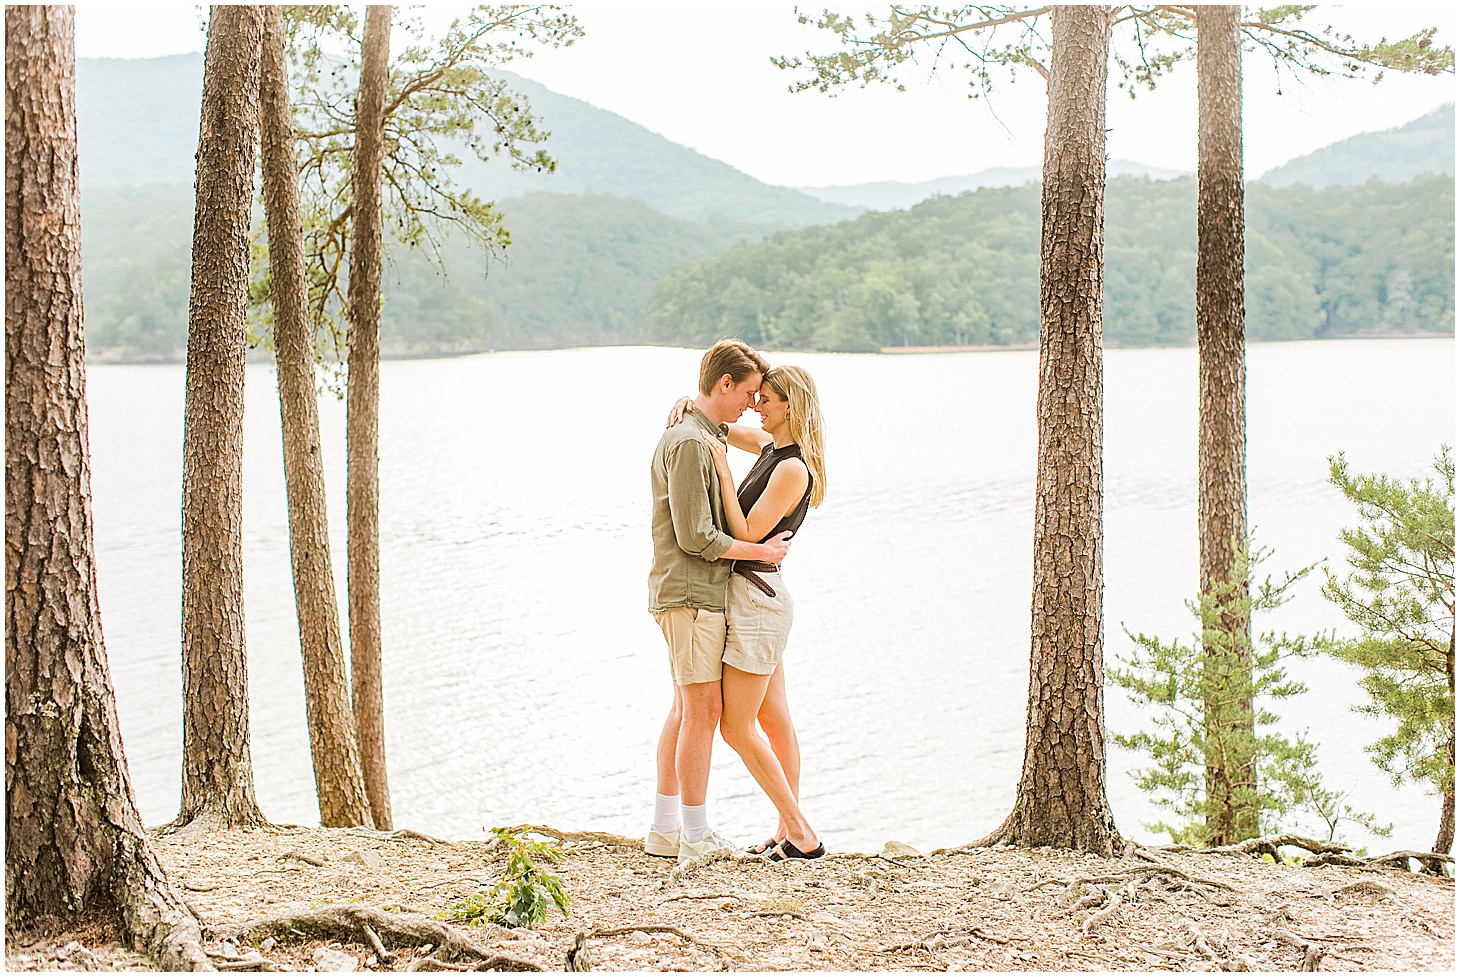 carvinscove_roanokeengagementsession_virginiaweddingphotographer_vaweddingphotographer_photo_0030-1.jpg